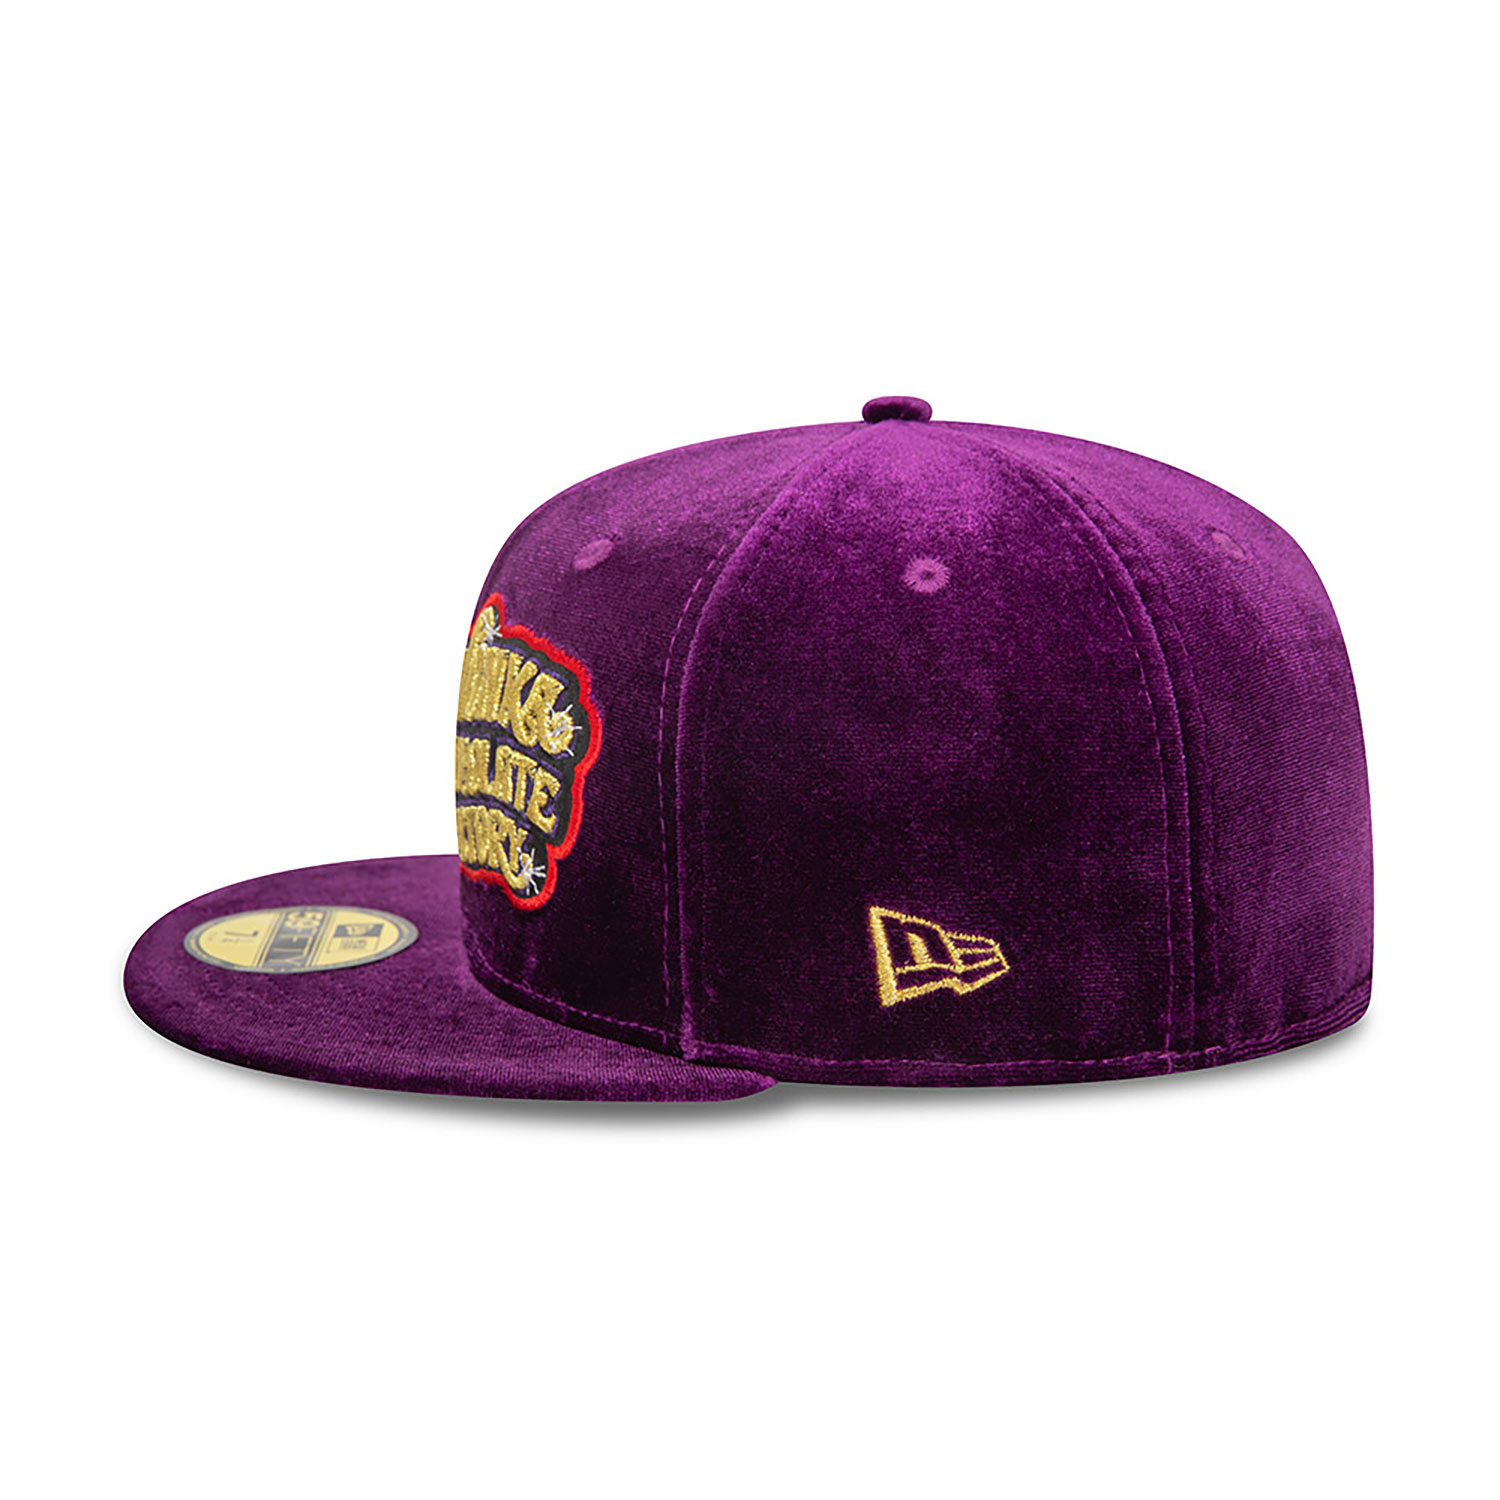 Willy Wonka And The Chocolate Factory Velvet Purple 59FIFTY Fitted Cap